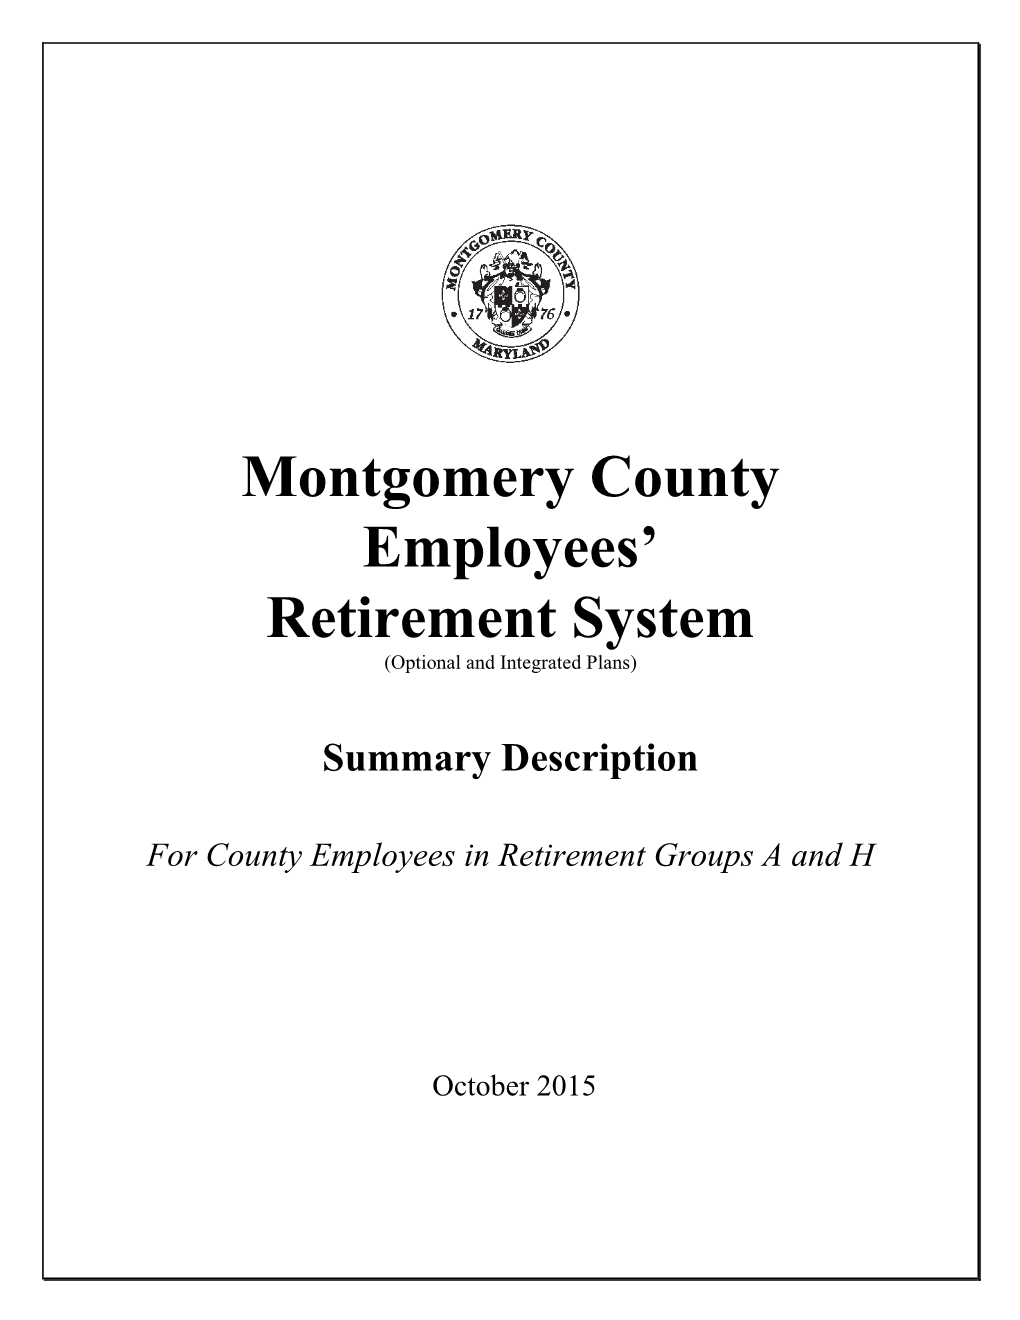 The Montgomery County Employee's Retirement System